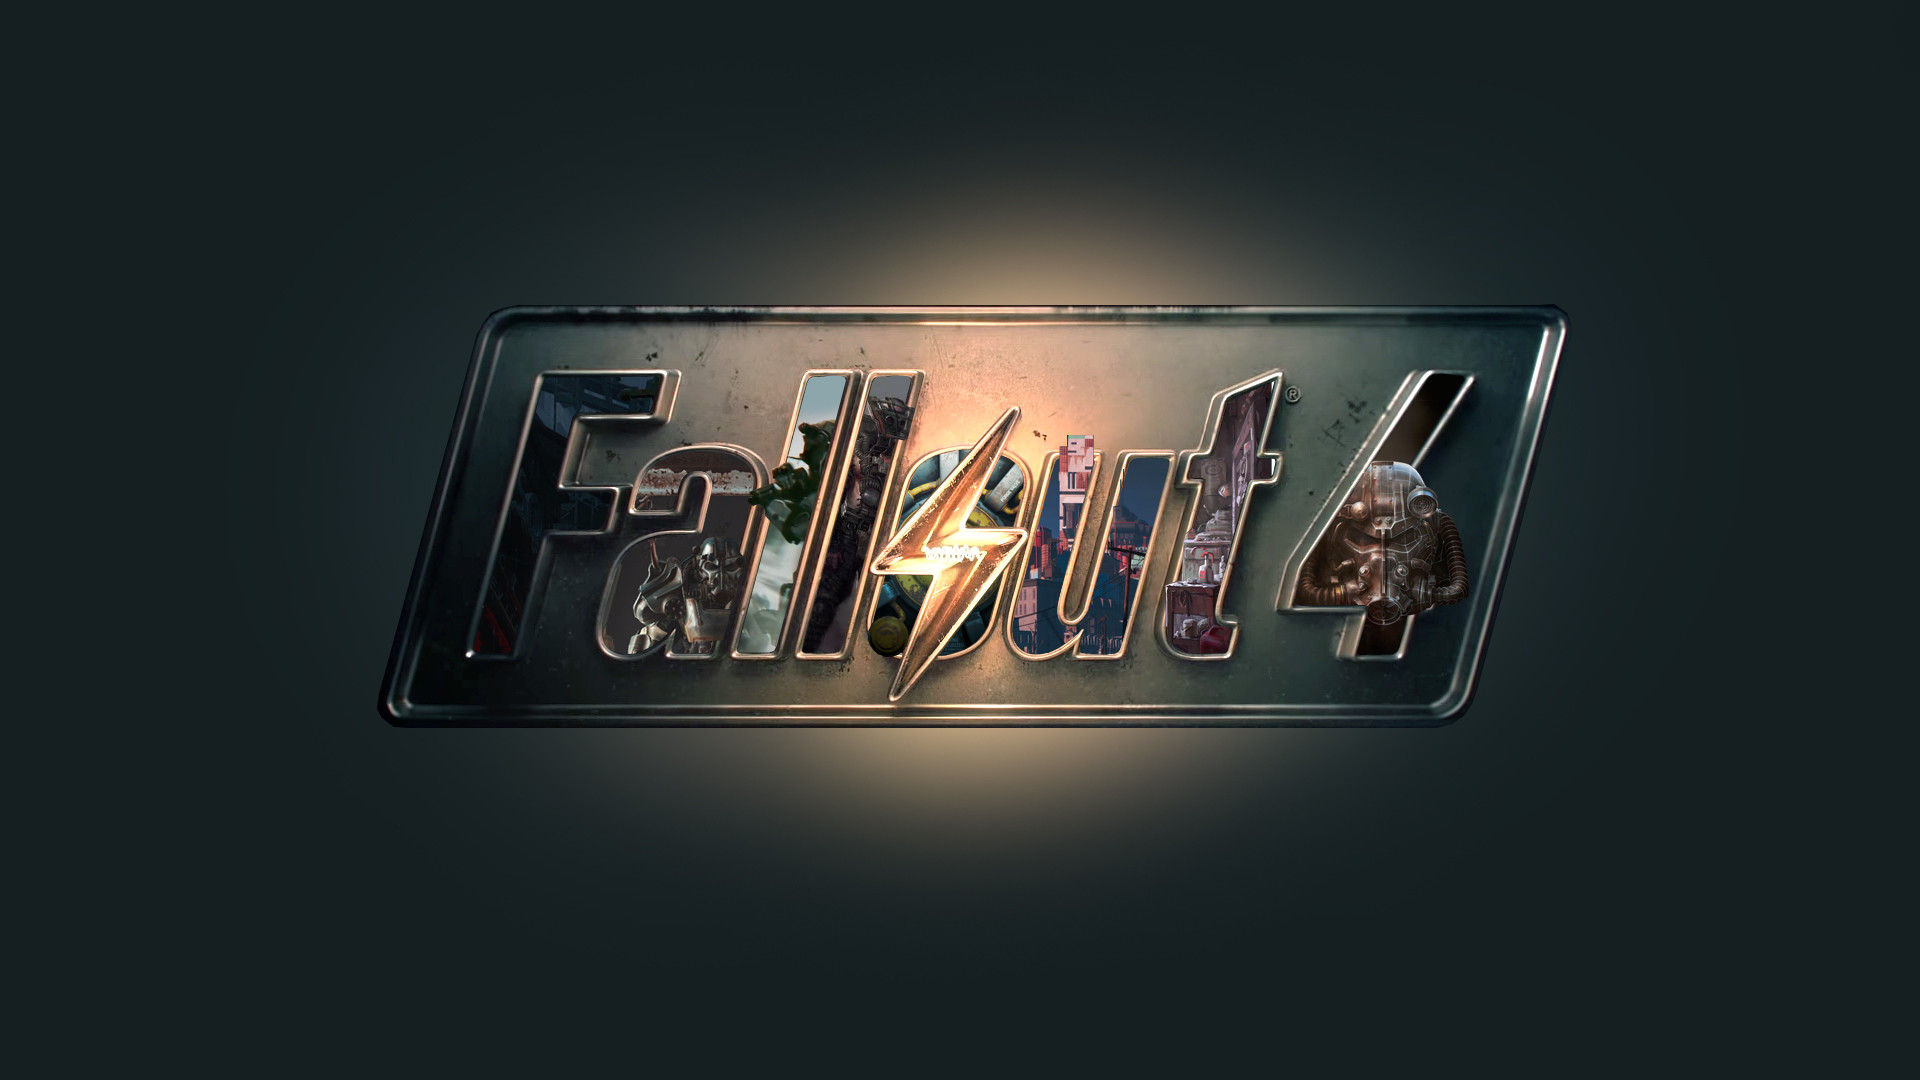 Fan-Made Fallout 4 wallpaper (thought I'd share) …